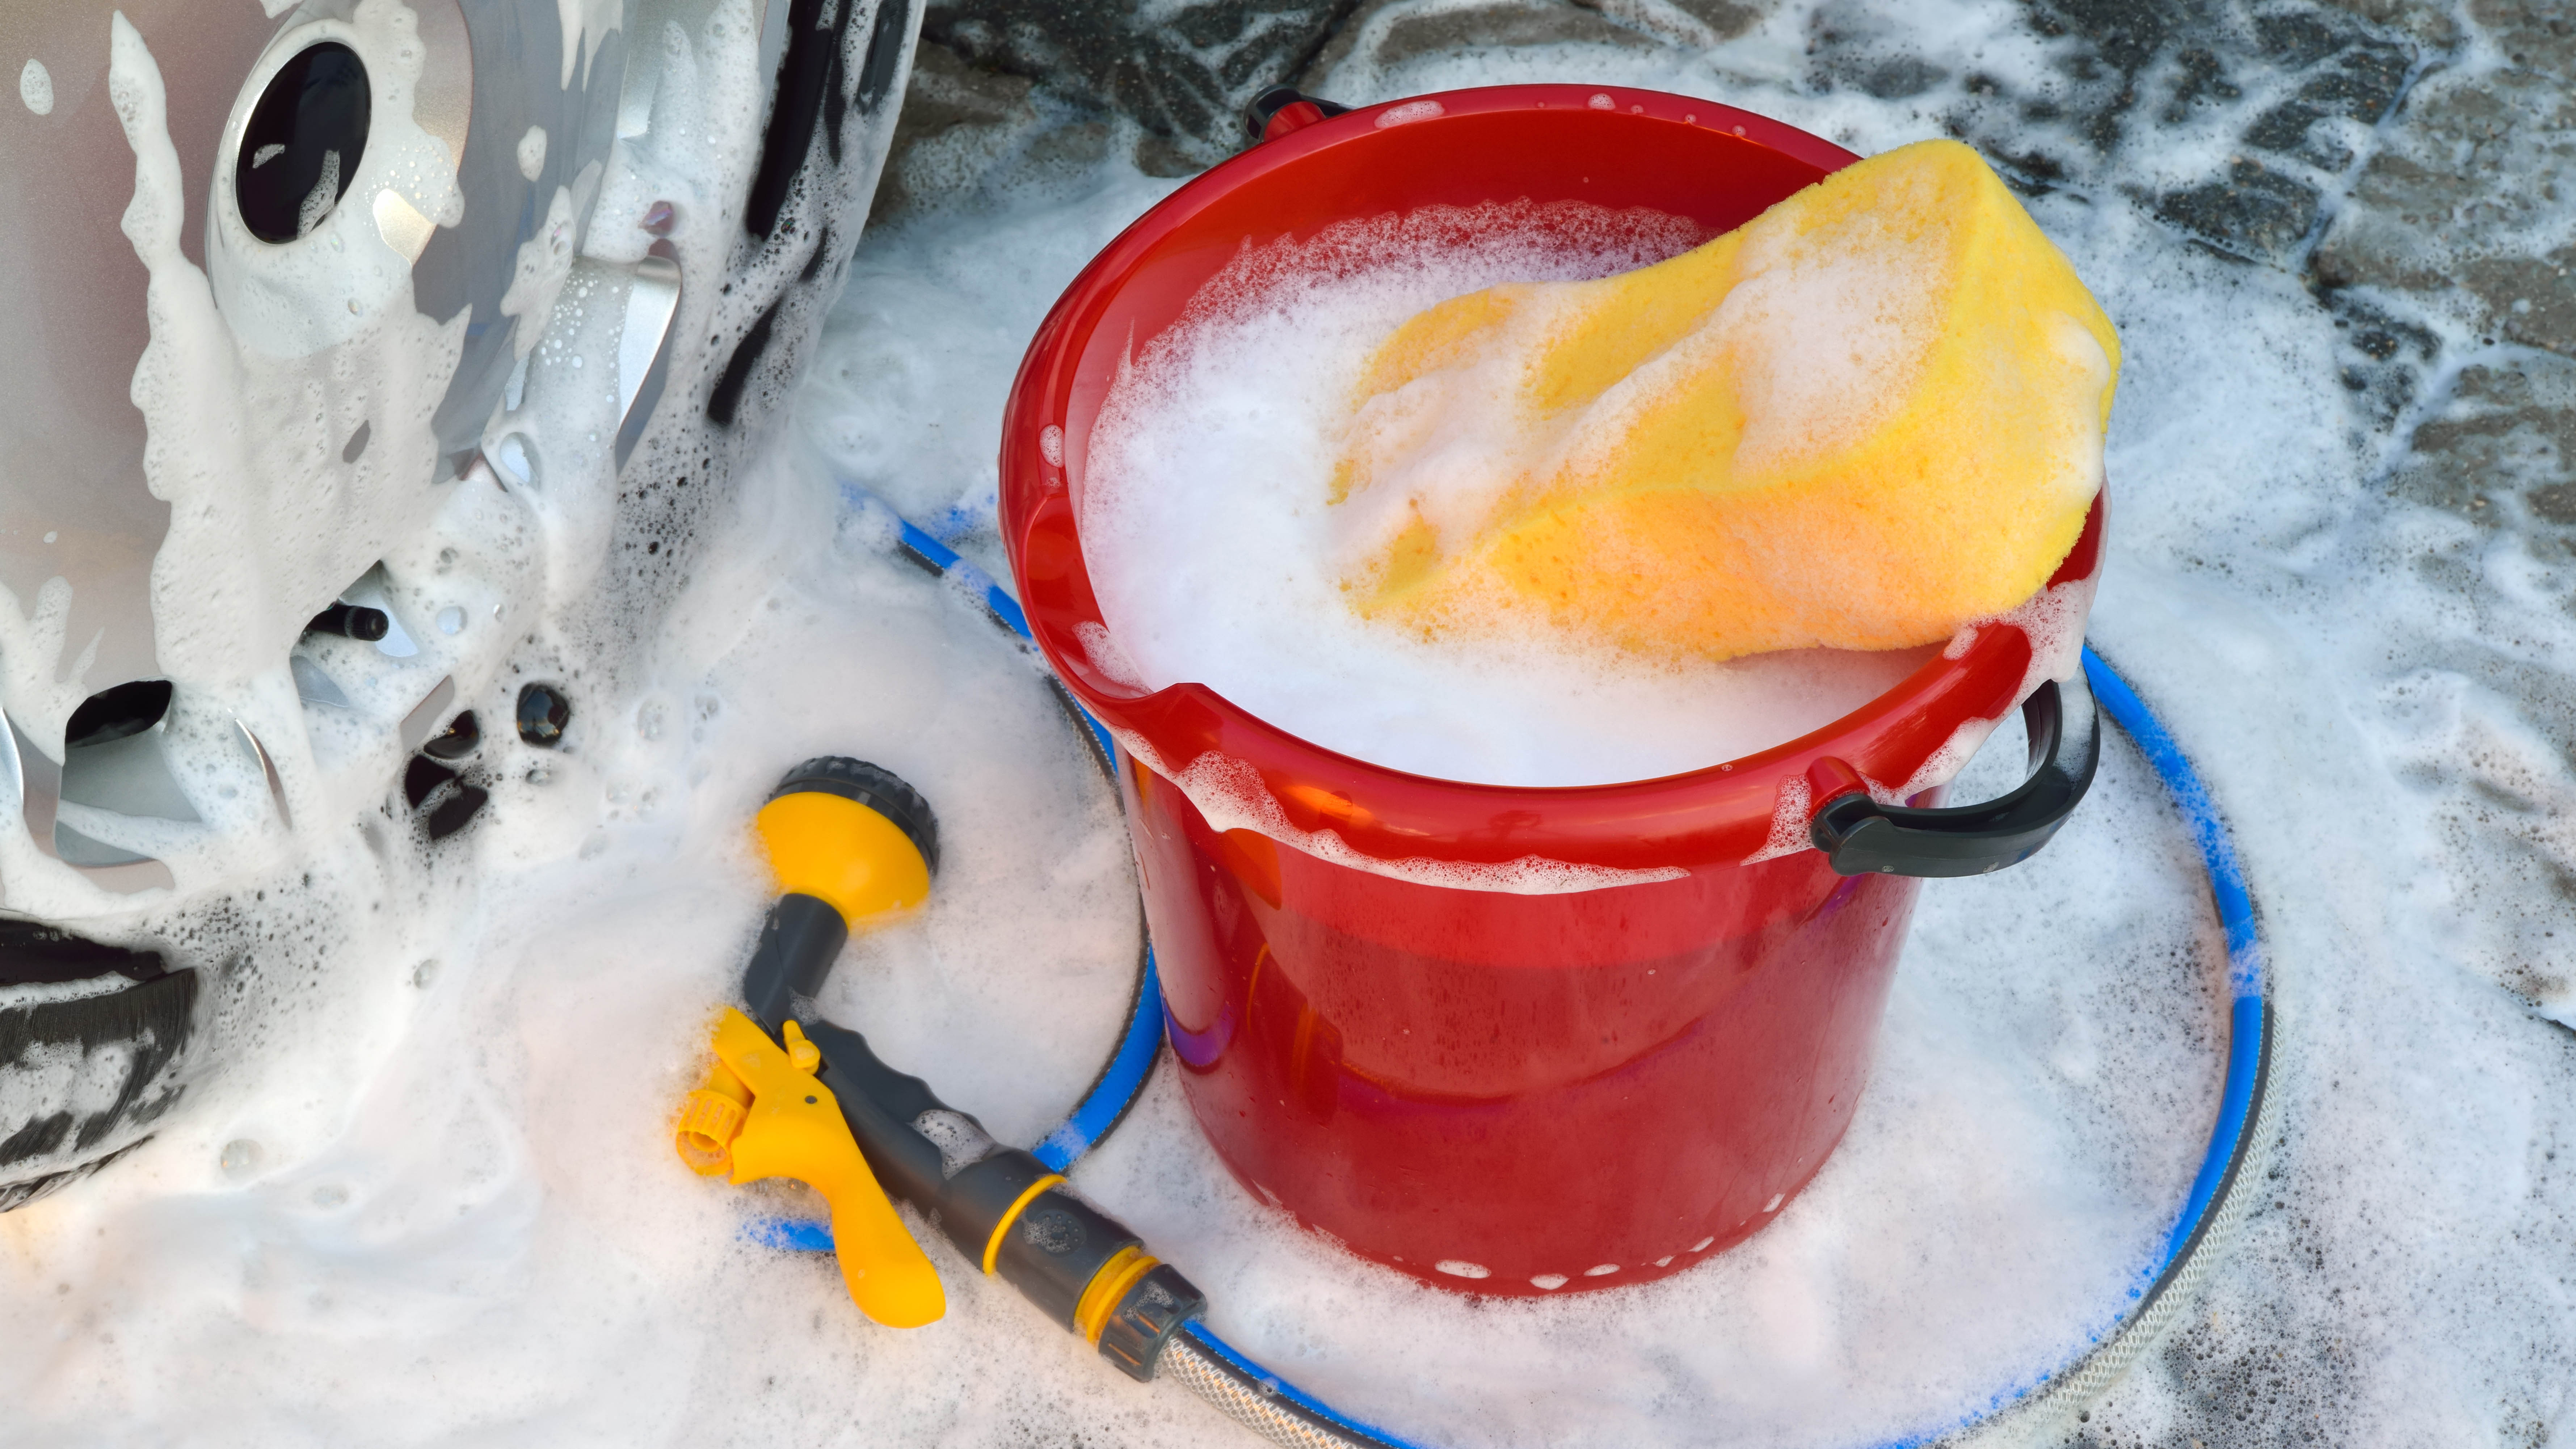 A red bucket filled with soapy water and a sponge next to a car